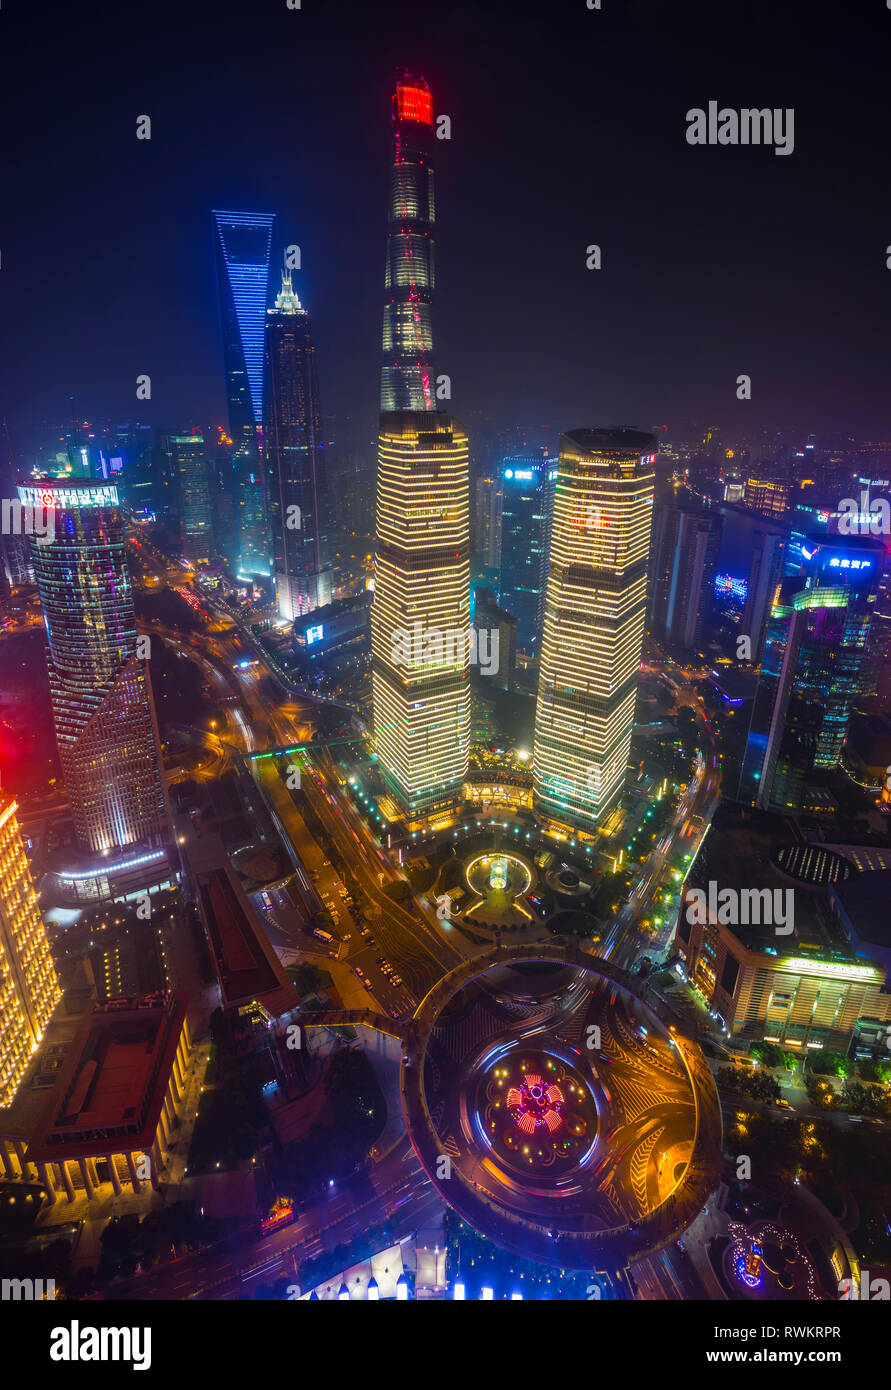 Pudong skyline with Shanghai Tower, Shanghai World Financial Centre and IFC at night, high angle view, Shanghai, China Stock Photo